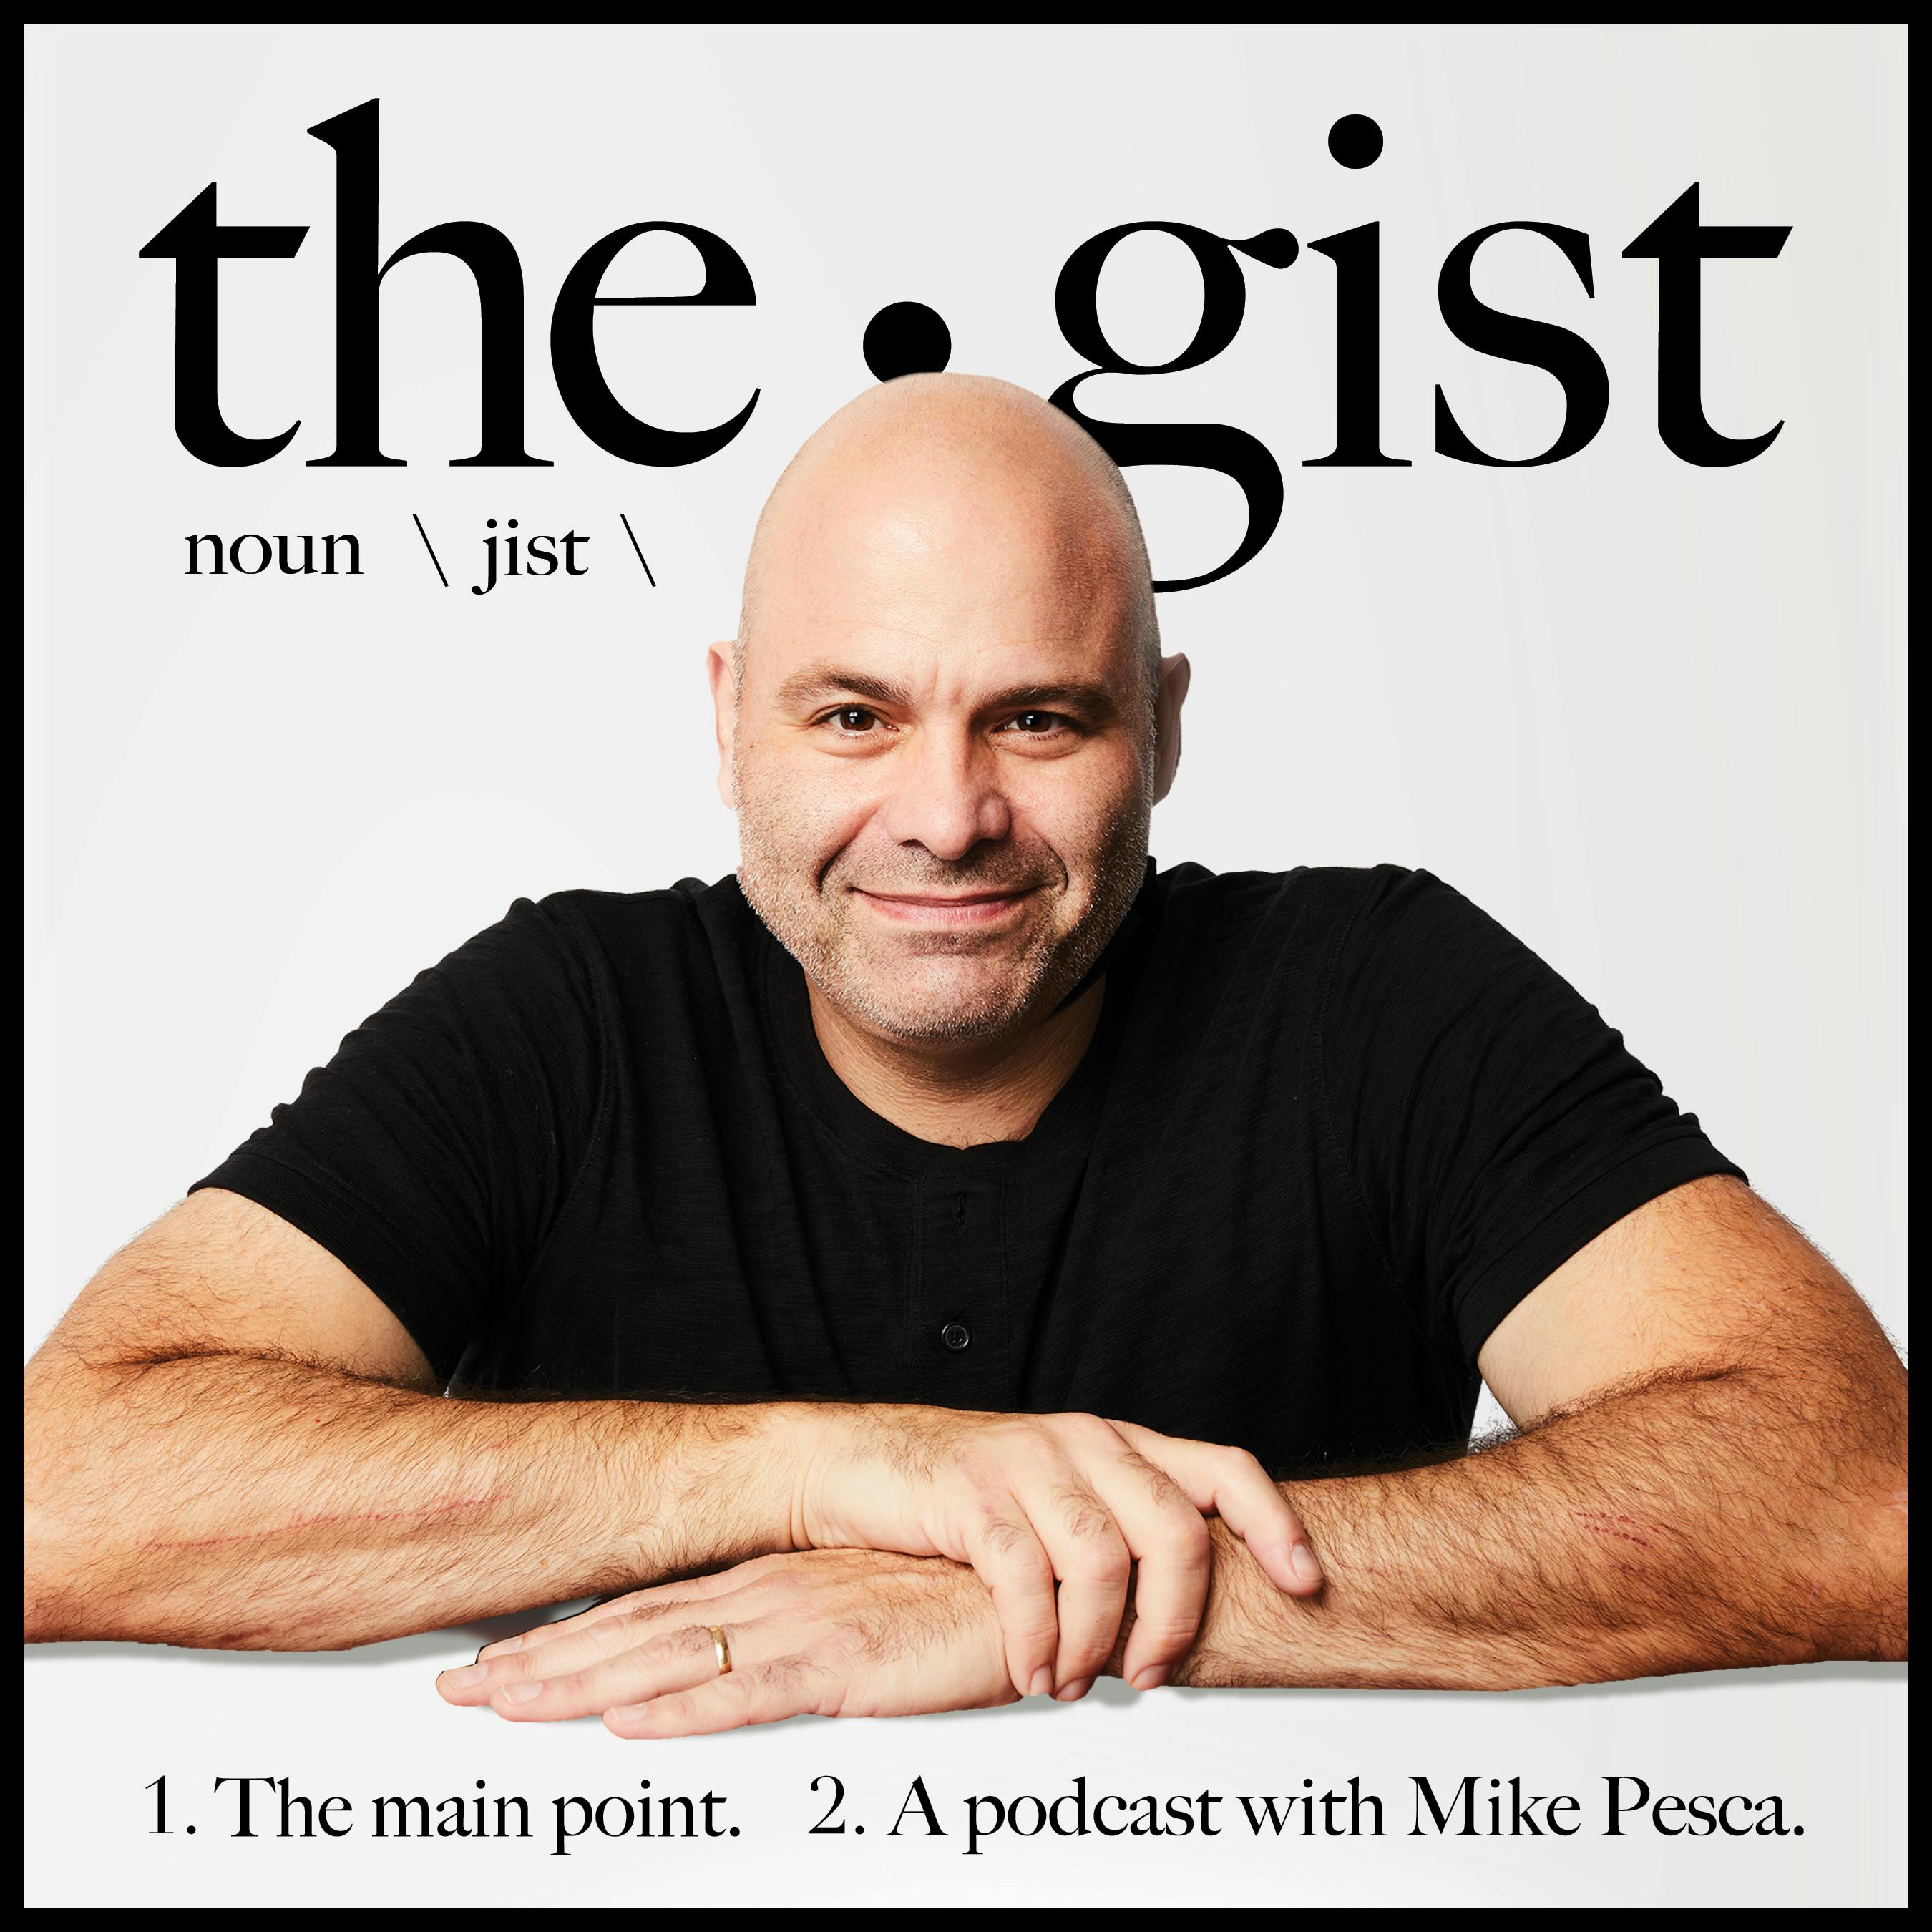 The Gist podcast show image